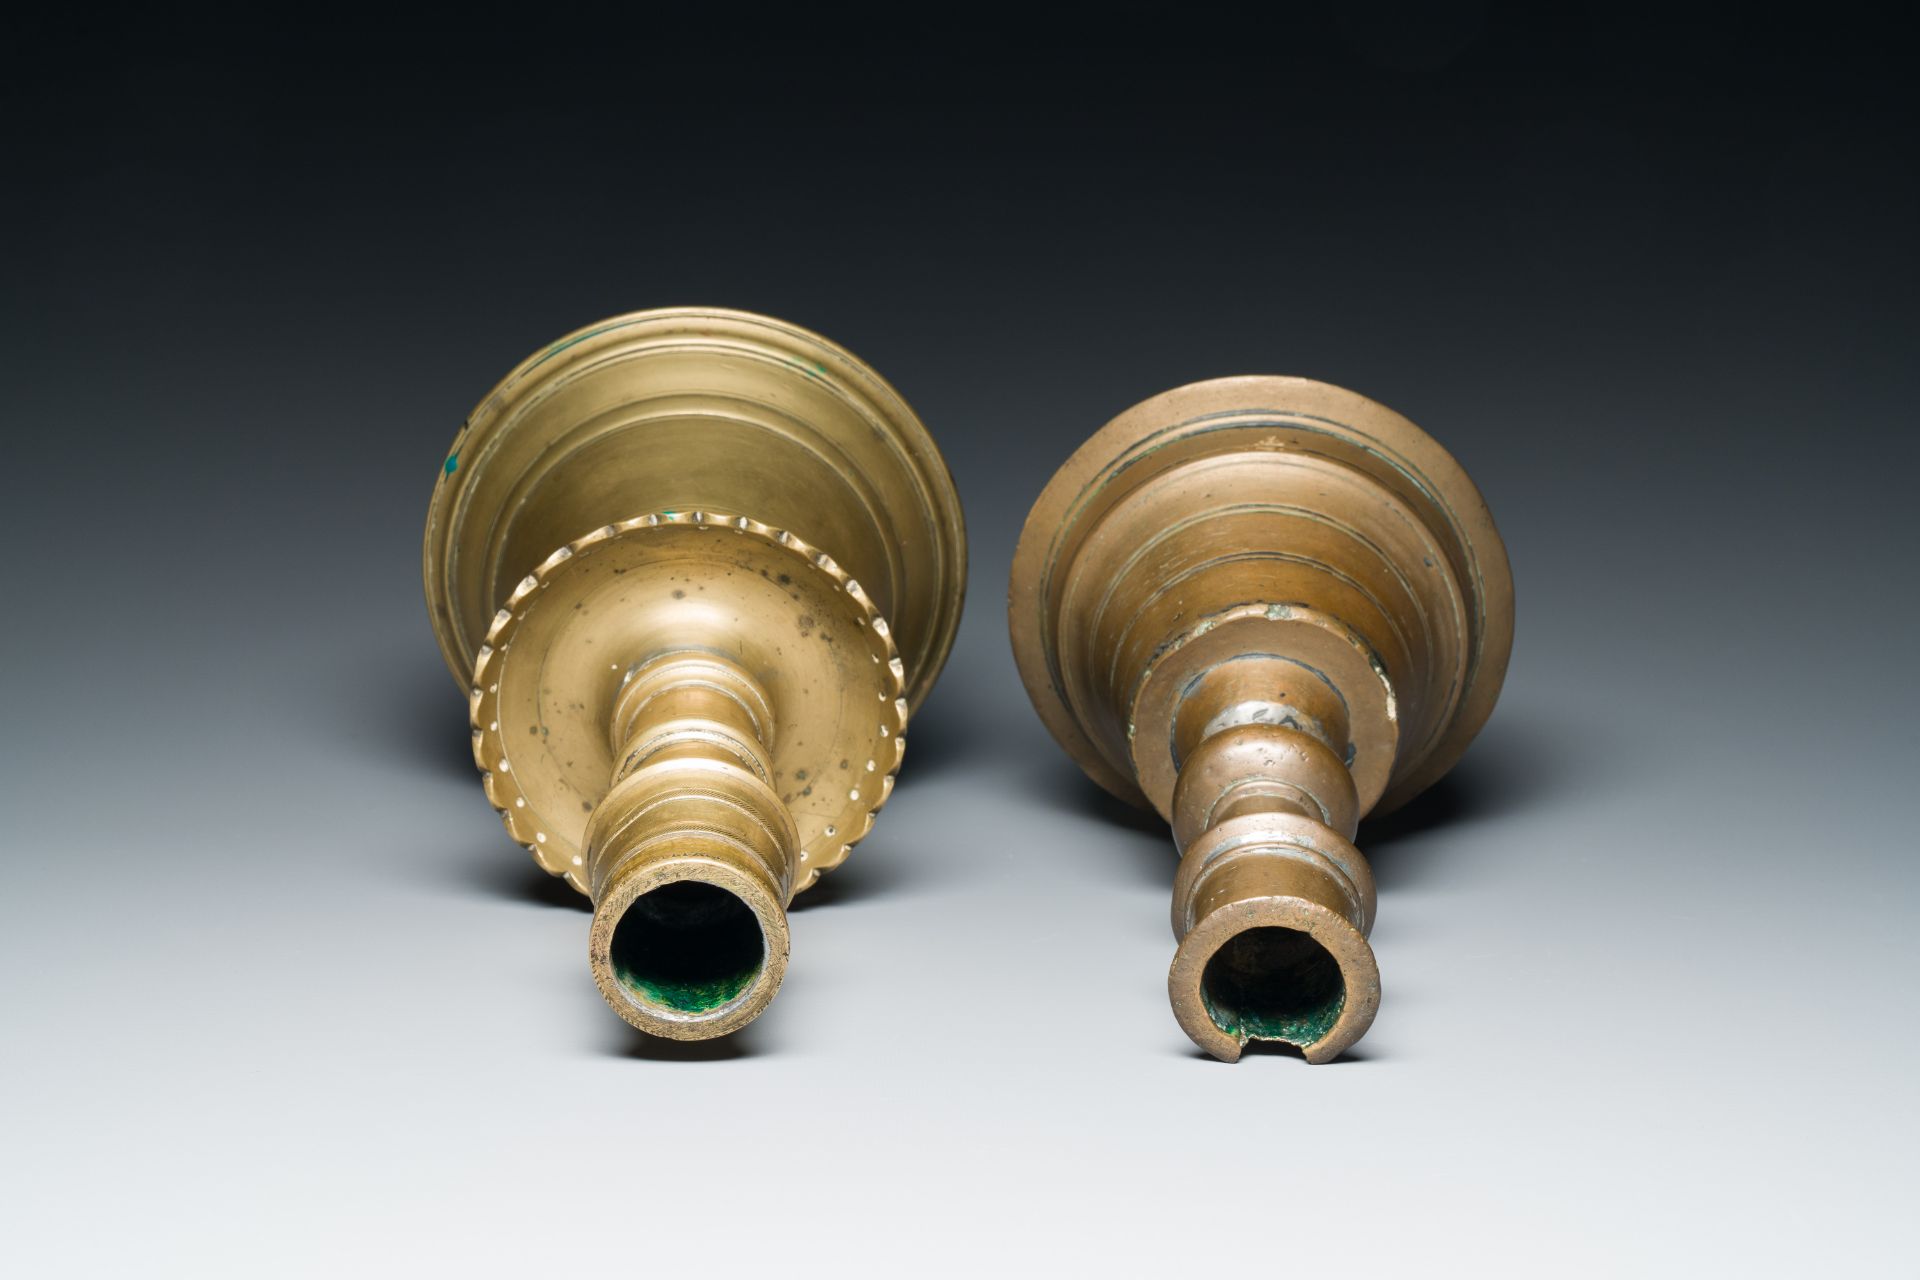 Two Ottoman bronze candlesticks, 17th C. - Image 7 of 7